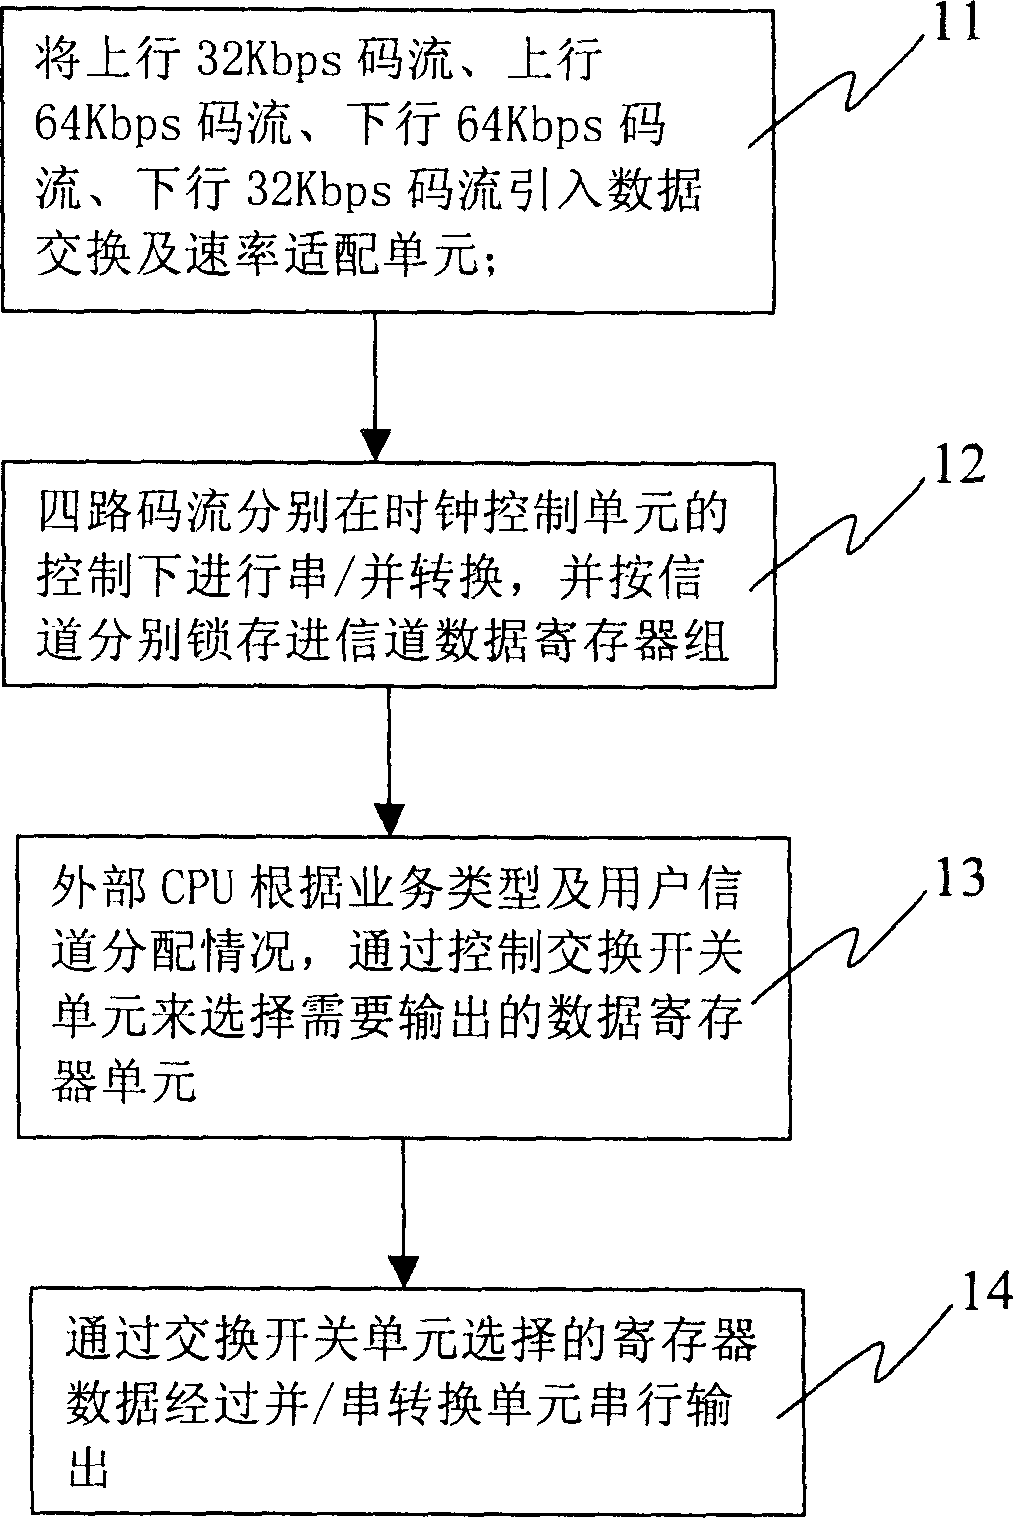 Method and device for implementing channel data exchange and rate adaption using programmable device